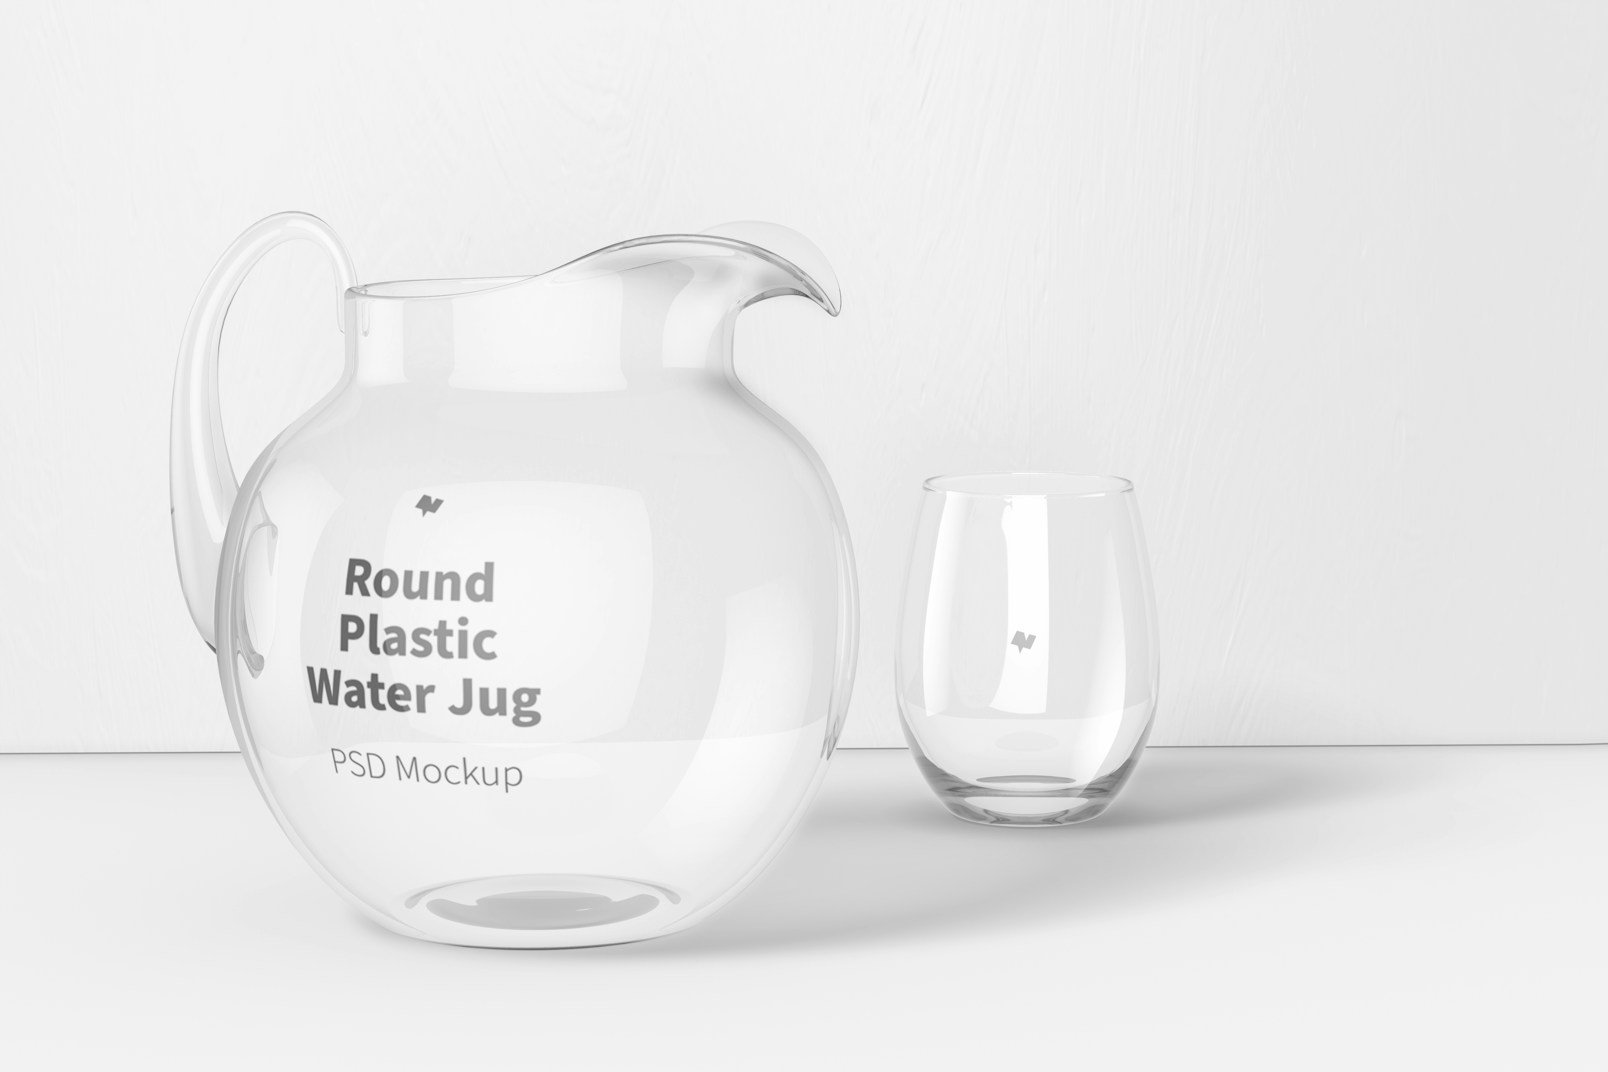 Round Plastic Water Jug with Glass Mockup